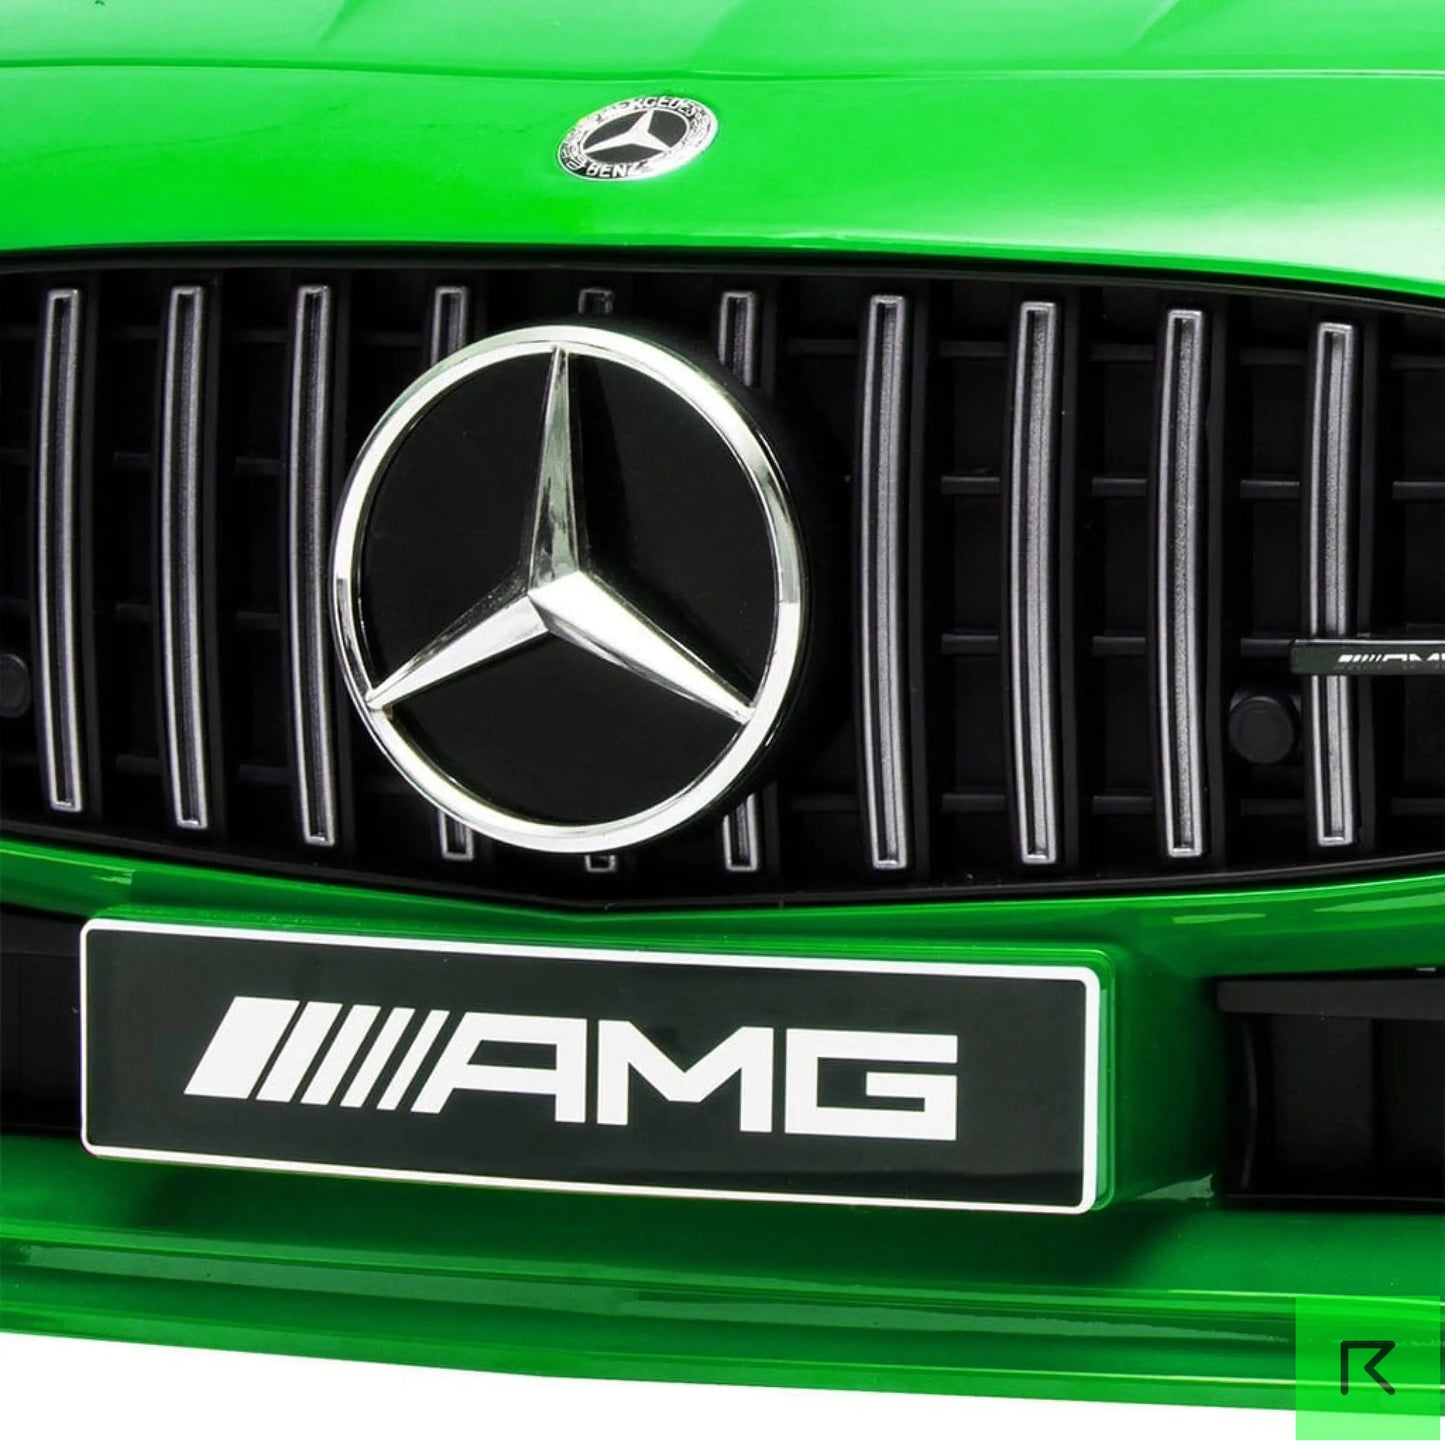 Mercedes Benz AMG GTR Kids Green Electric Ride On Car - Ride On Cars